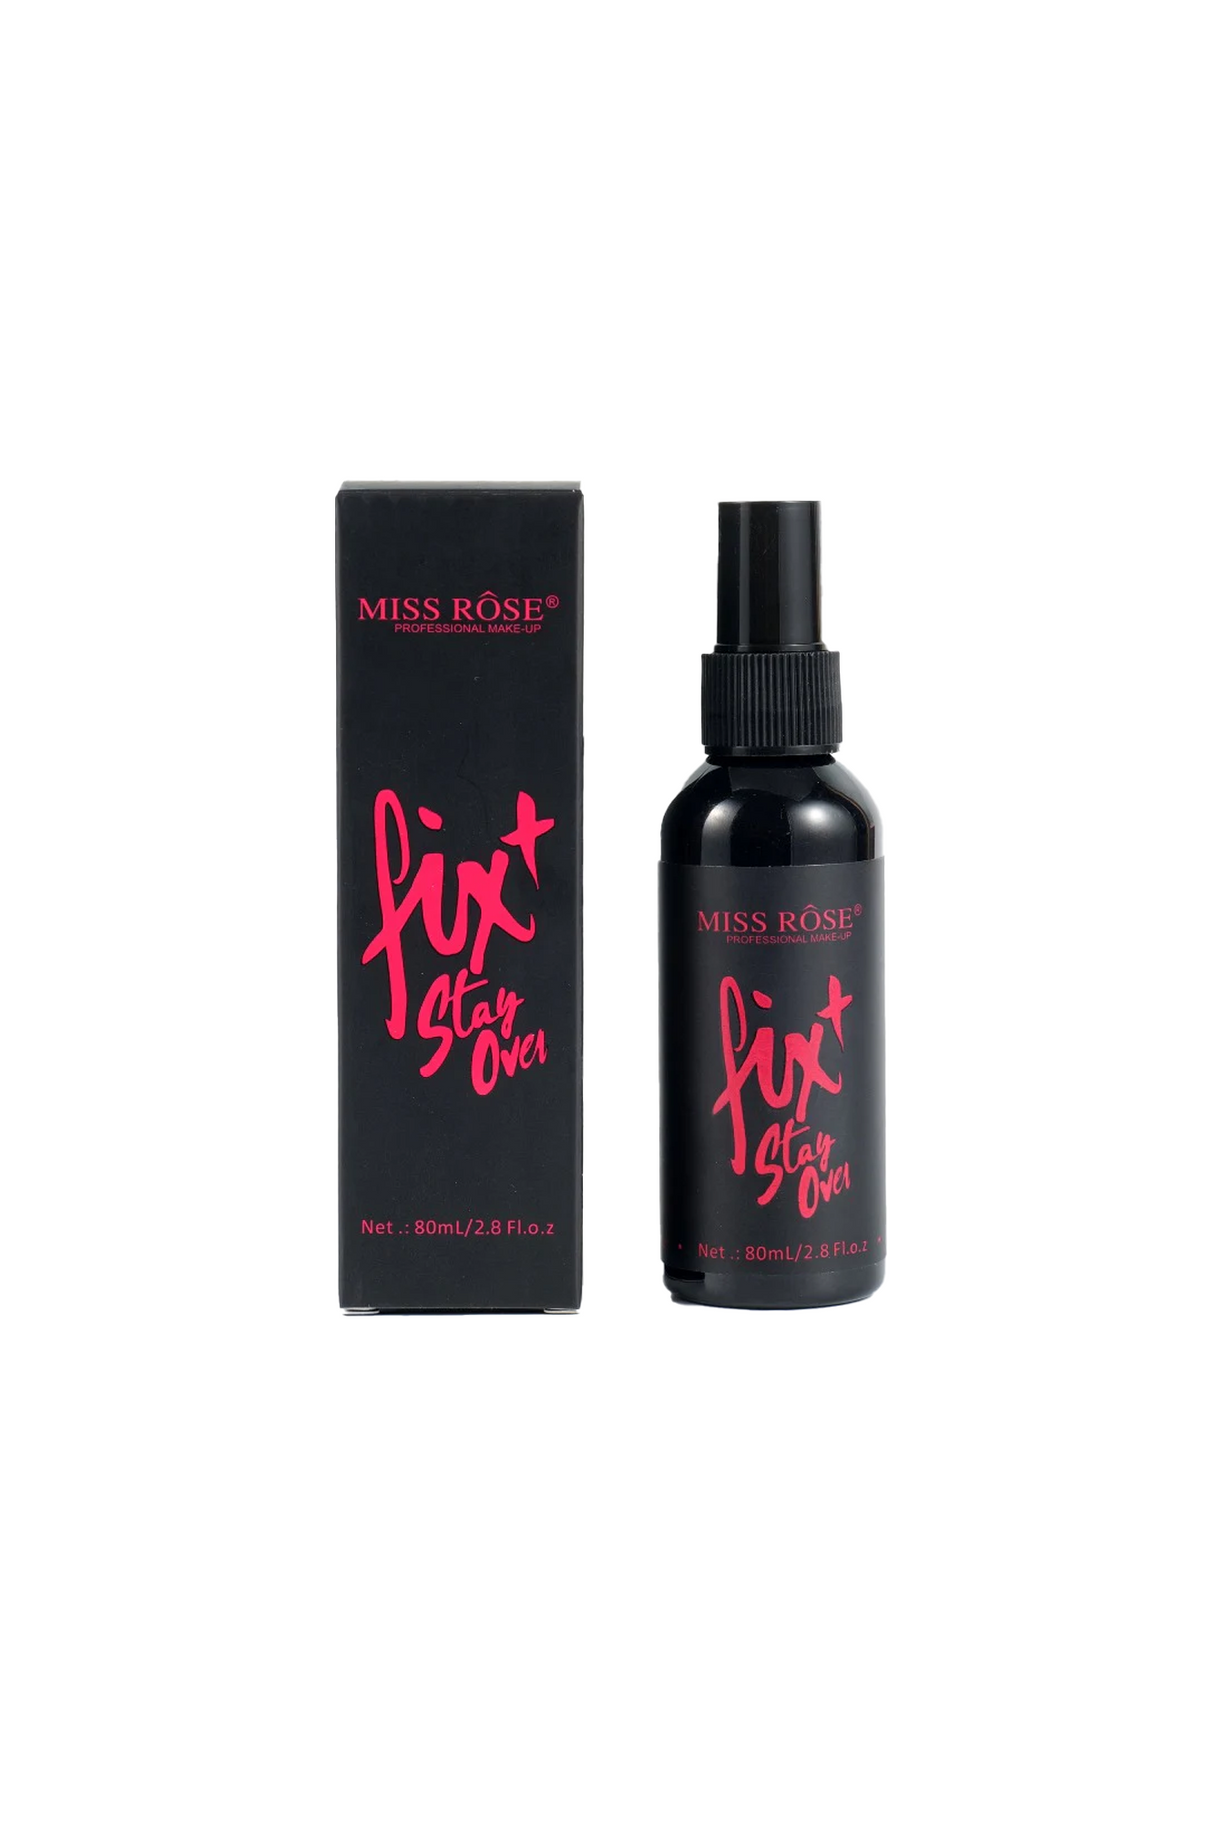 miss rose fix stay over 80ml 7505-025m